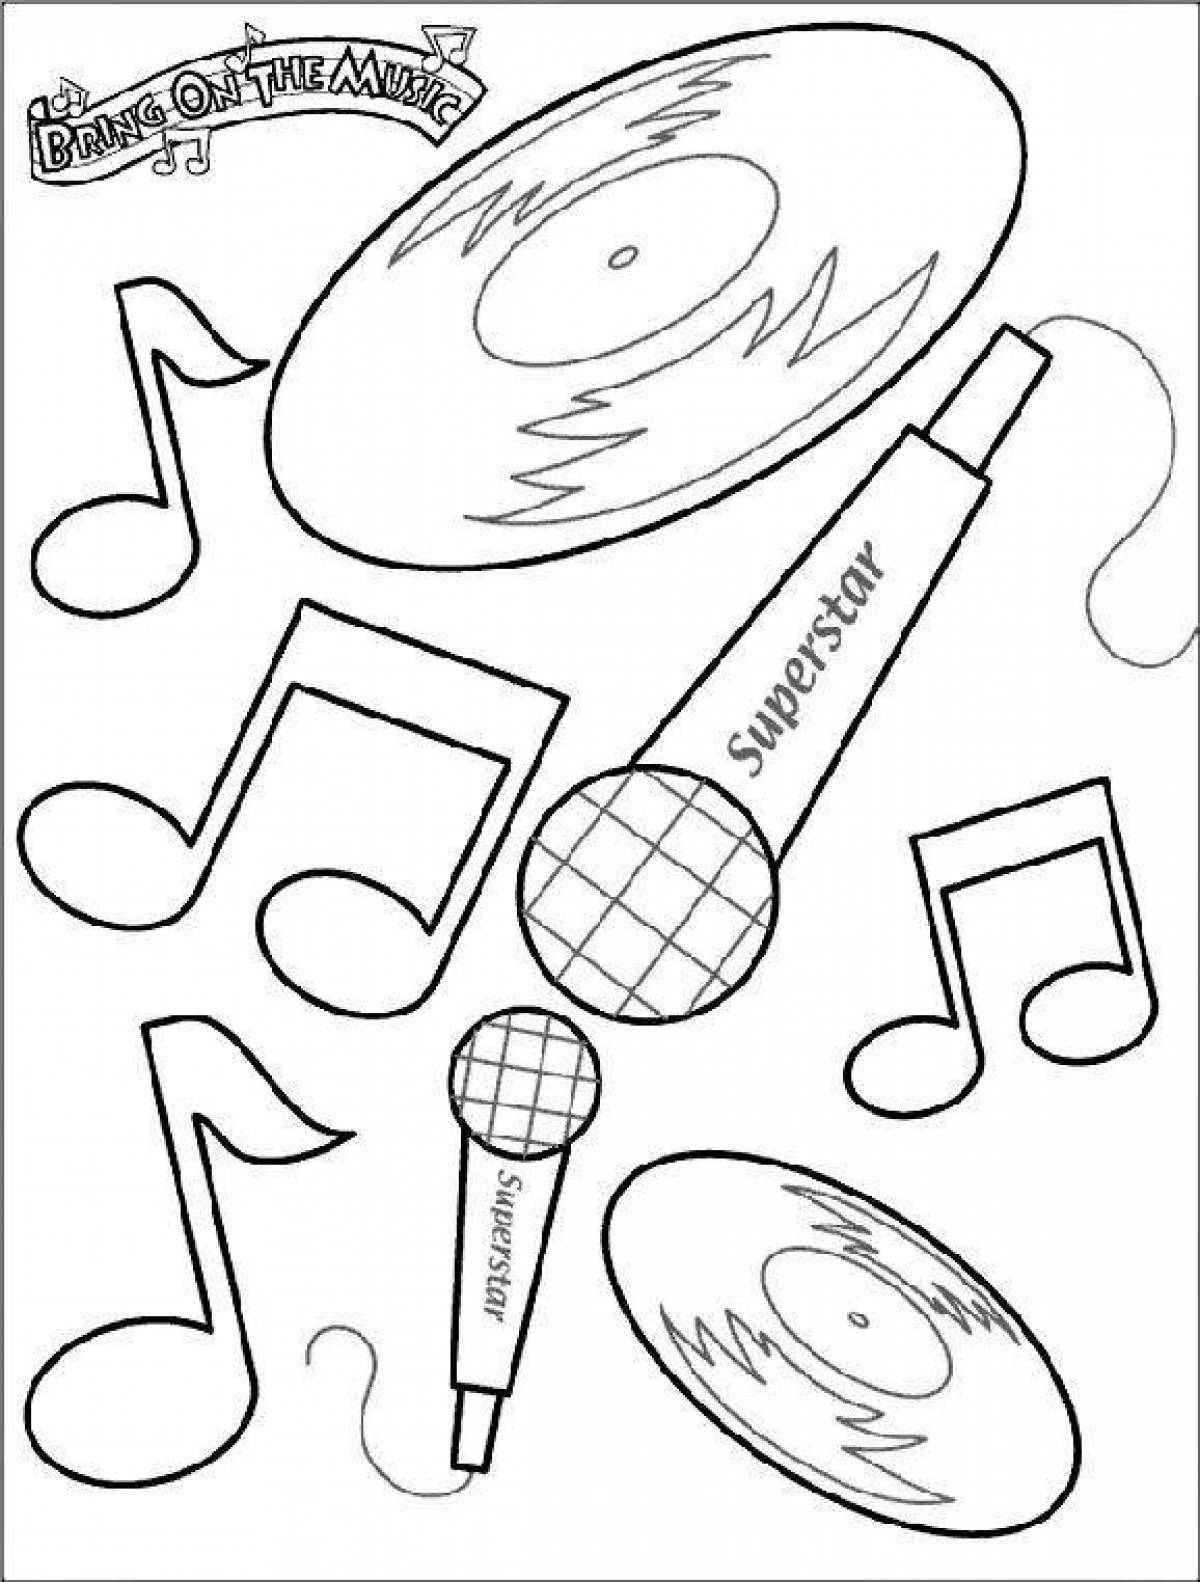 Amazing musical instruments coloring 1st grade